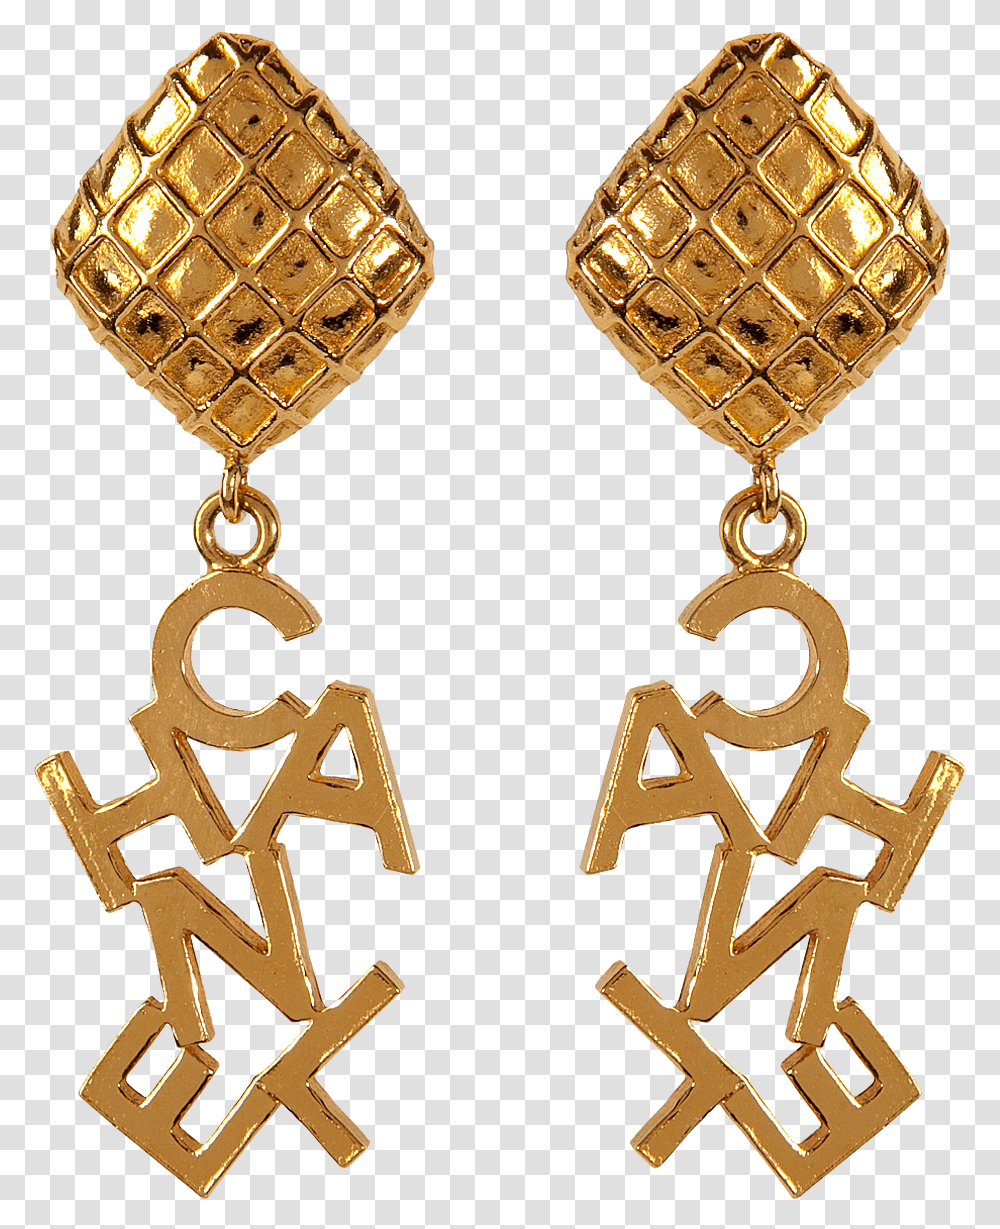 Chain Gold Jewellery Earring Clothing Chanel Clipart, Jewelry, Accessories, Accessory Transparent Png